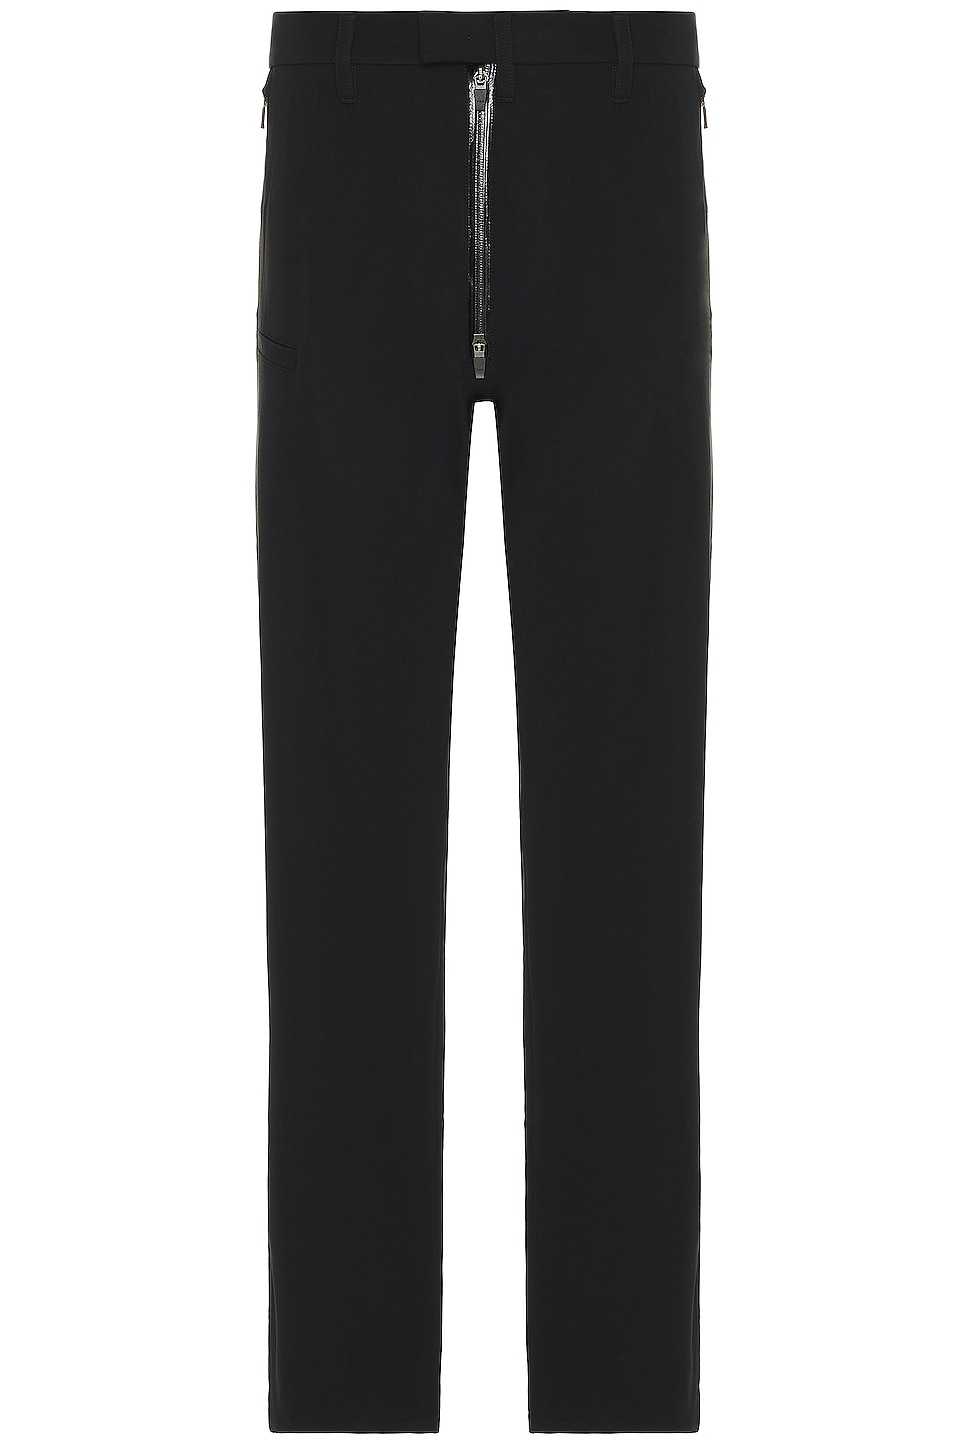 Image 1 of Acronym P47-ds Schoeller Dryskin Pant in Black